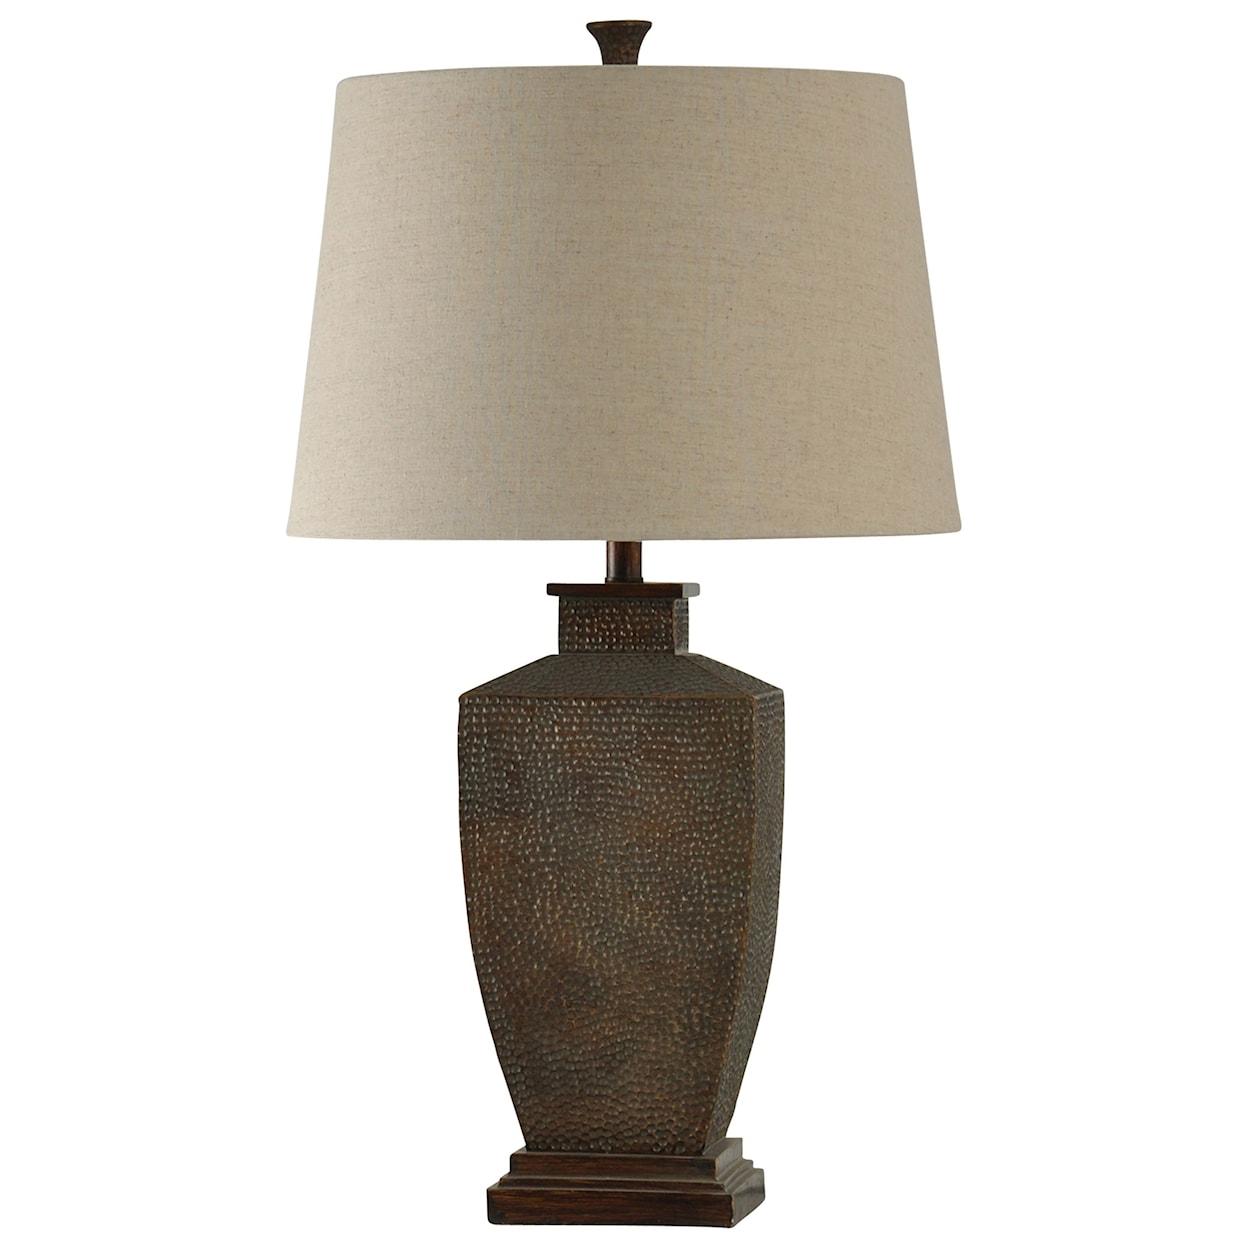 StyleCraft Lamps Hammered Metal Finish Table Lamp